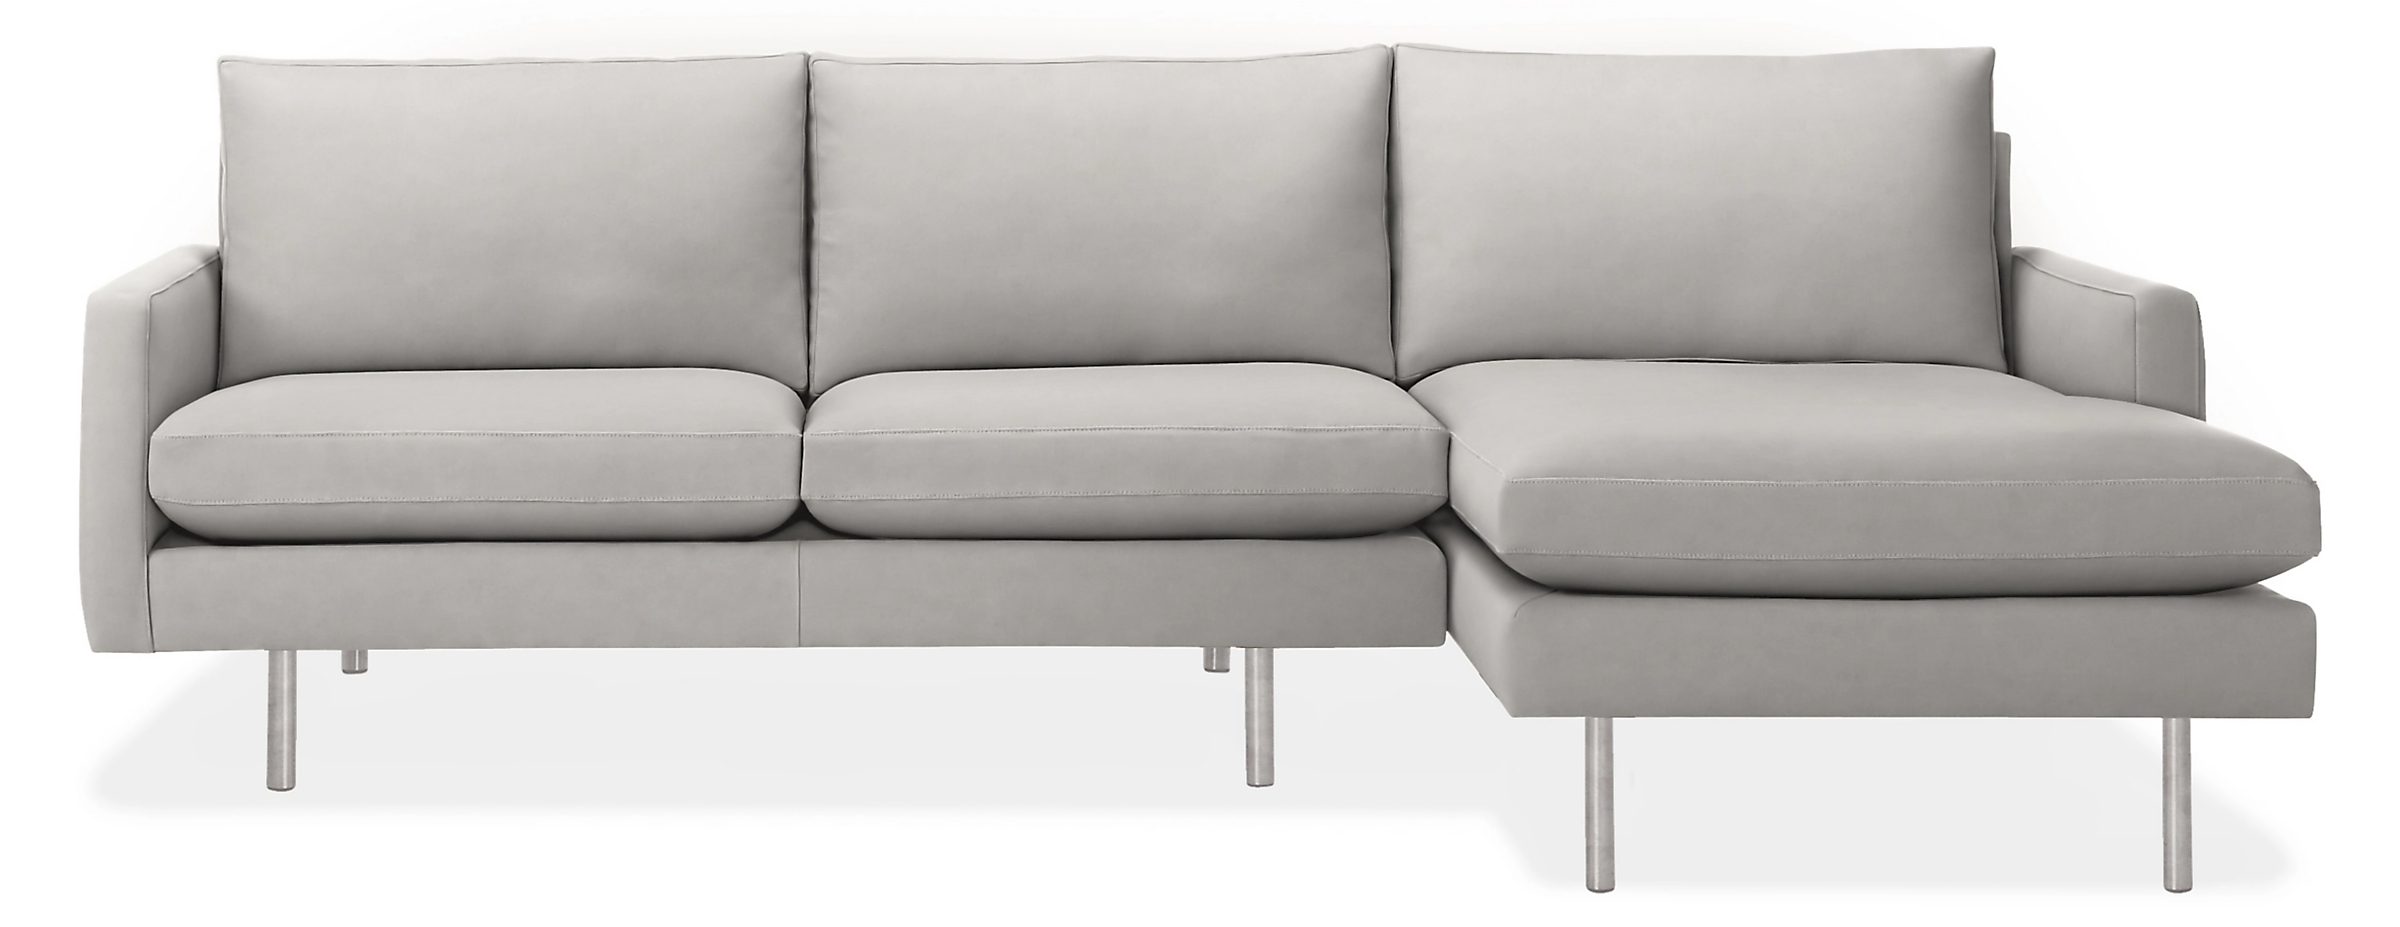 Jasper 104" Sofa with Right-Arm Chaise in View Grey with Stainless Steel Legs